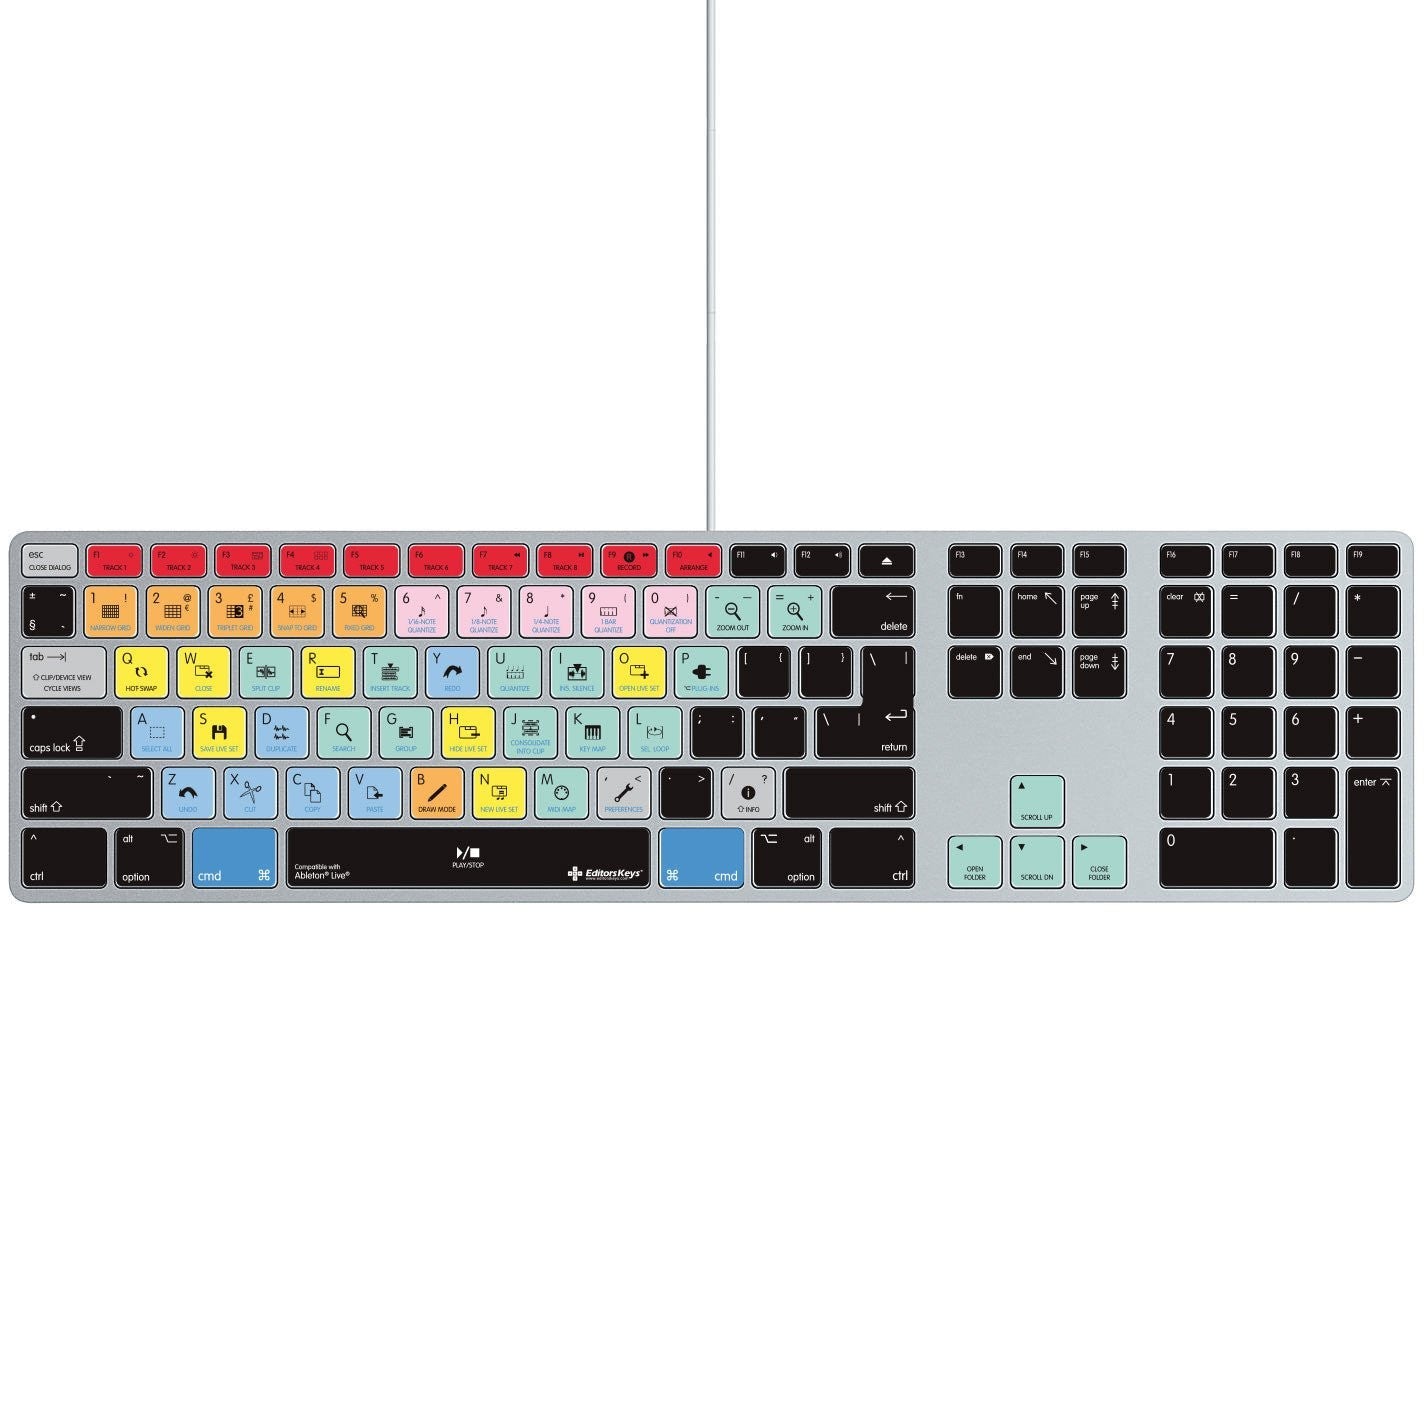 Ableton Live Keyboard Covers for MacBook and iMac - Editors Keys